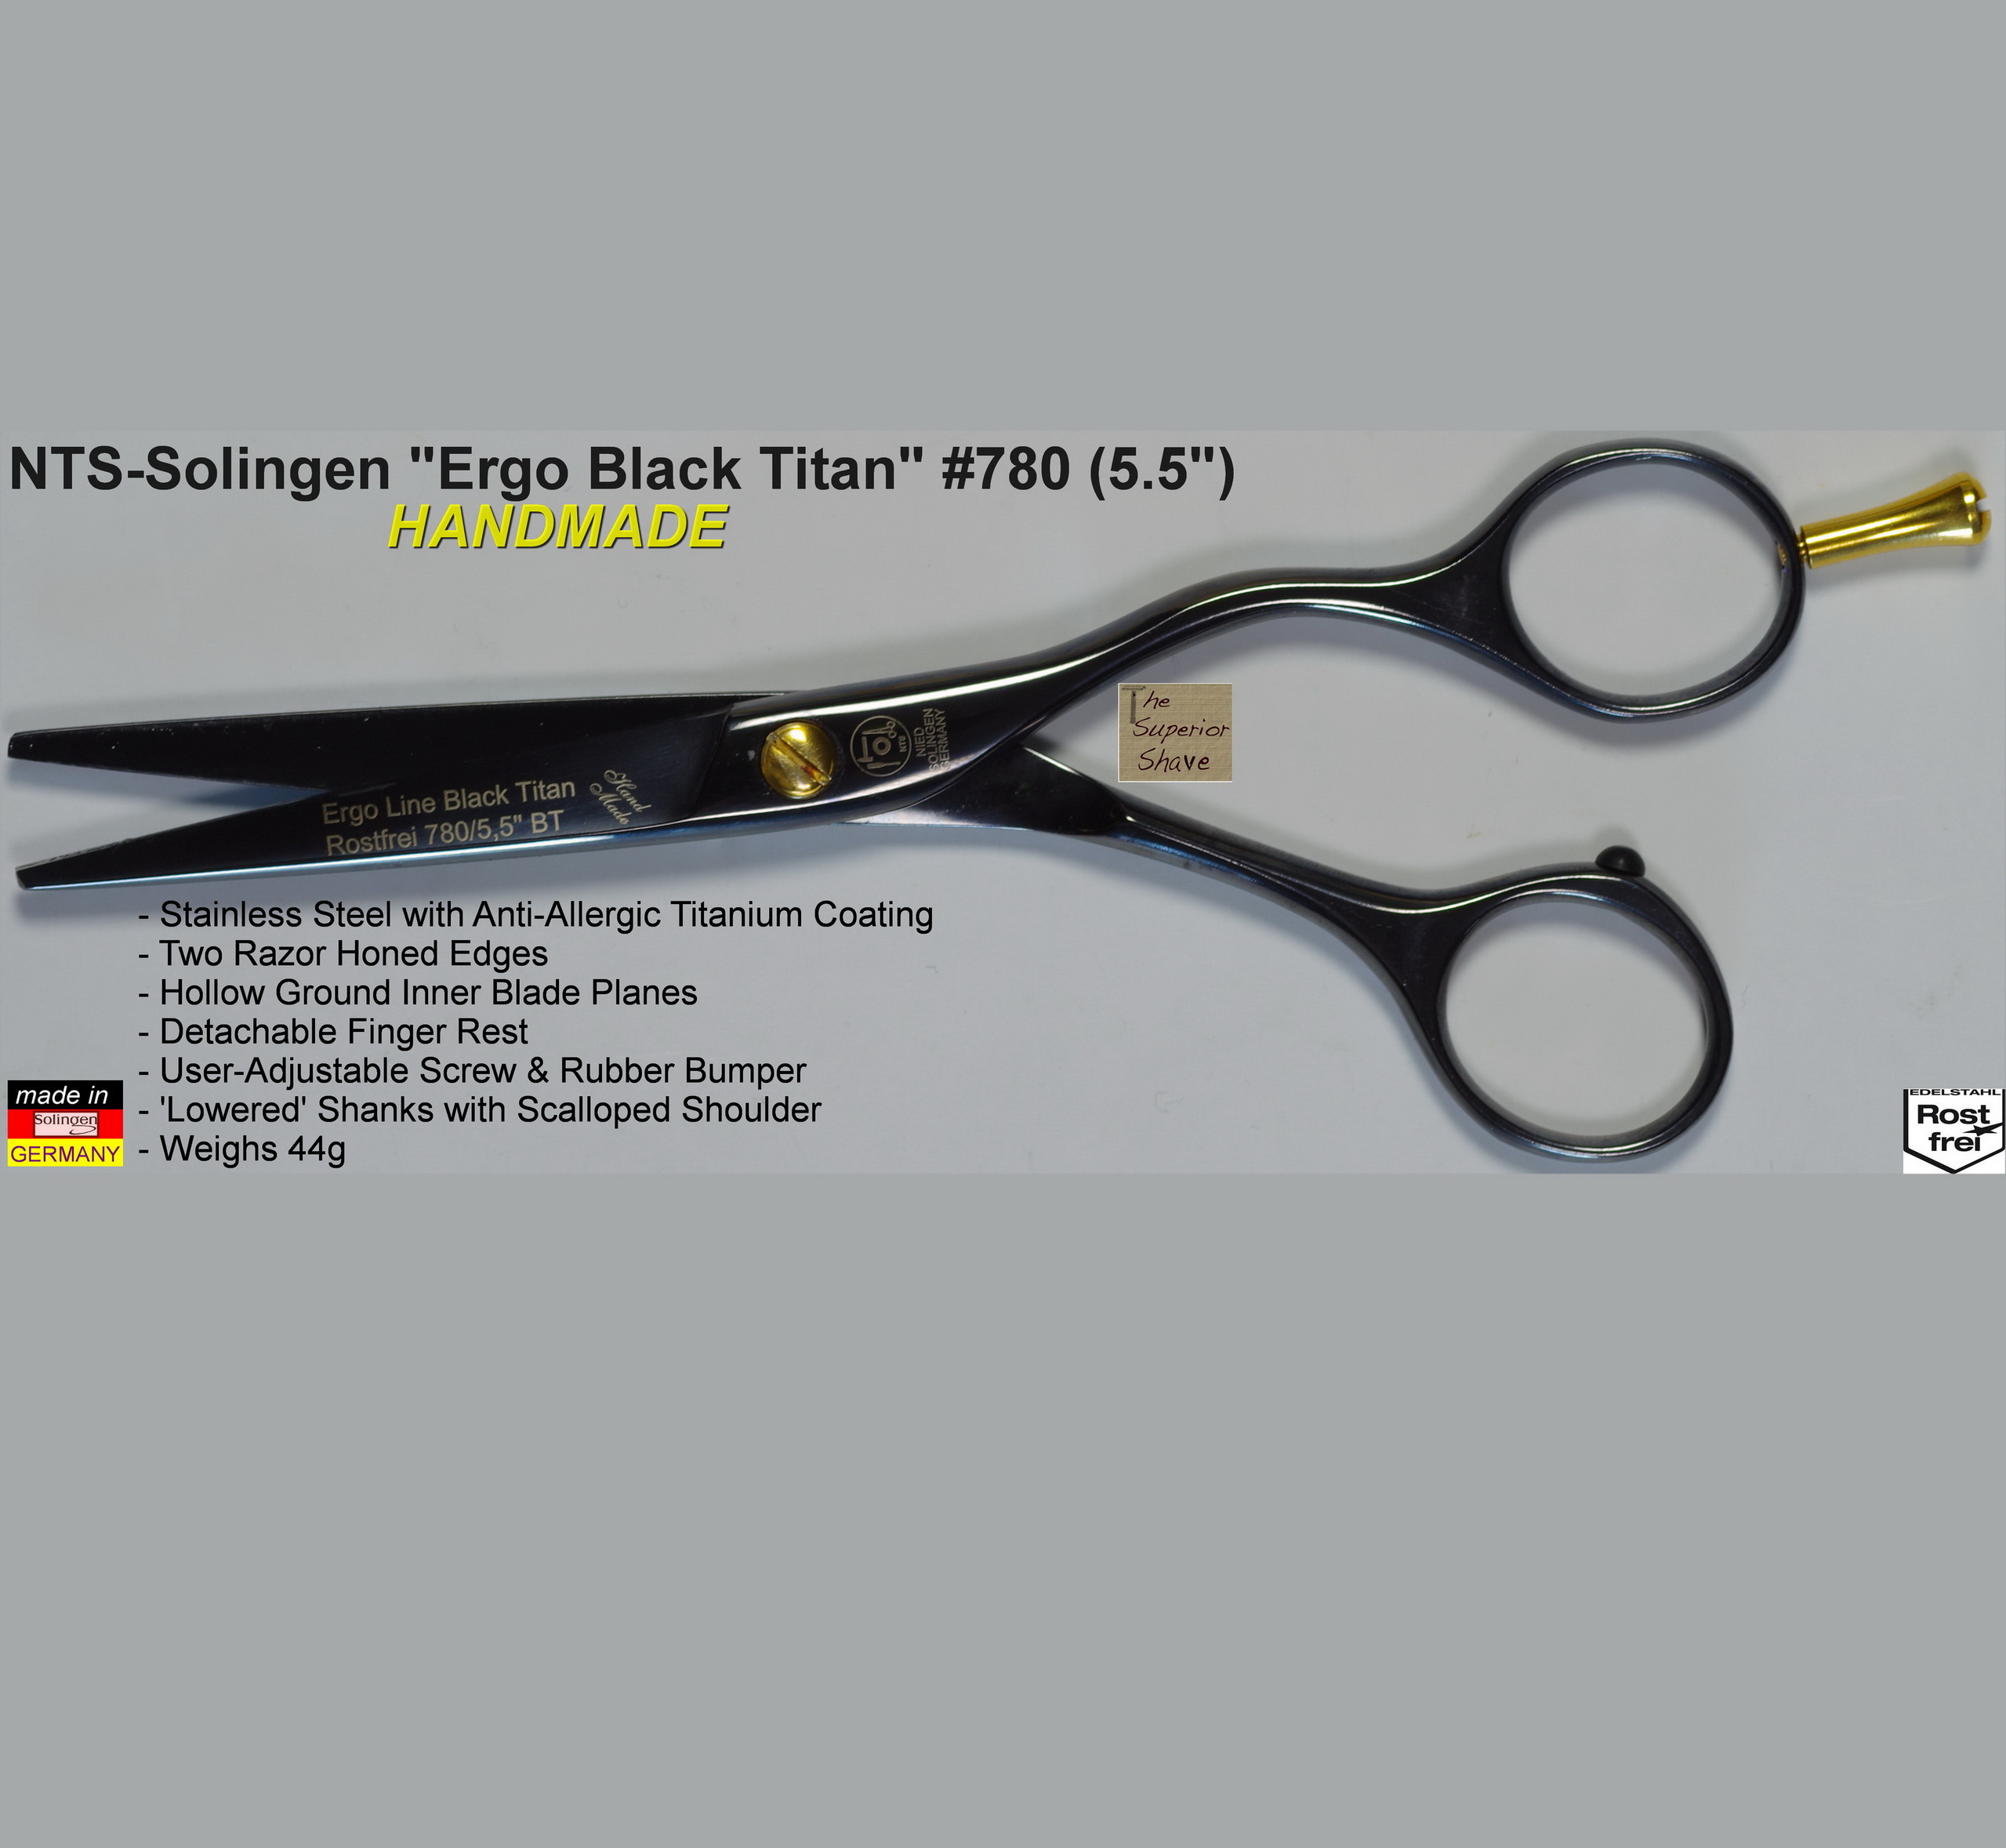 NTS Solingen Black Titan 205 LEFTHANDED Thinning Shears Scissors, 5.5″  Length with 35 Teeth, Titanium Coating, INOX Rostfrei Stainless Steel